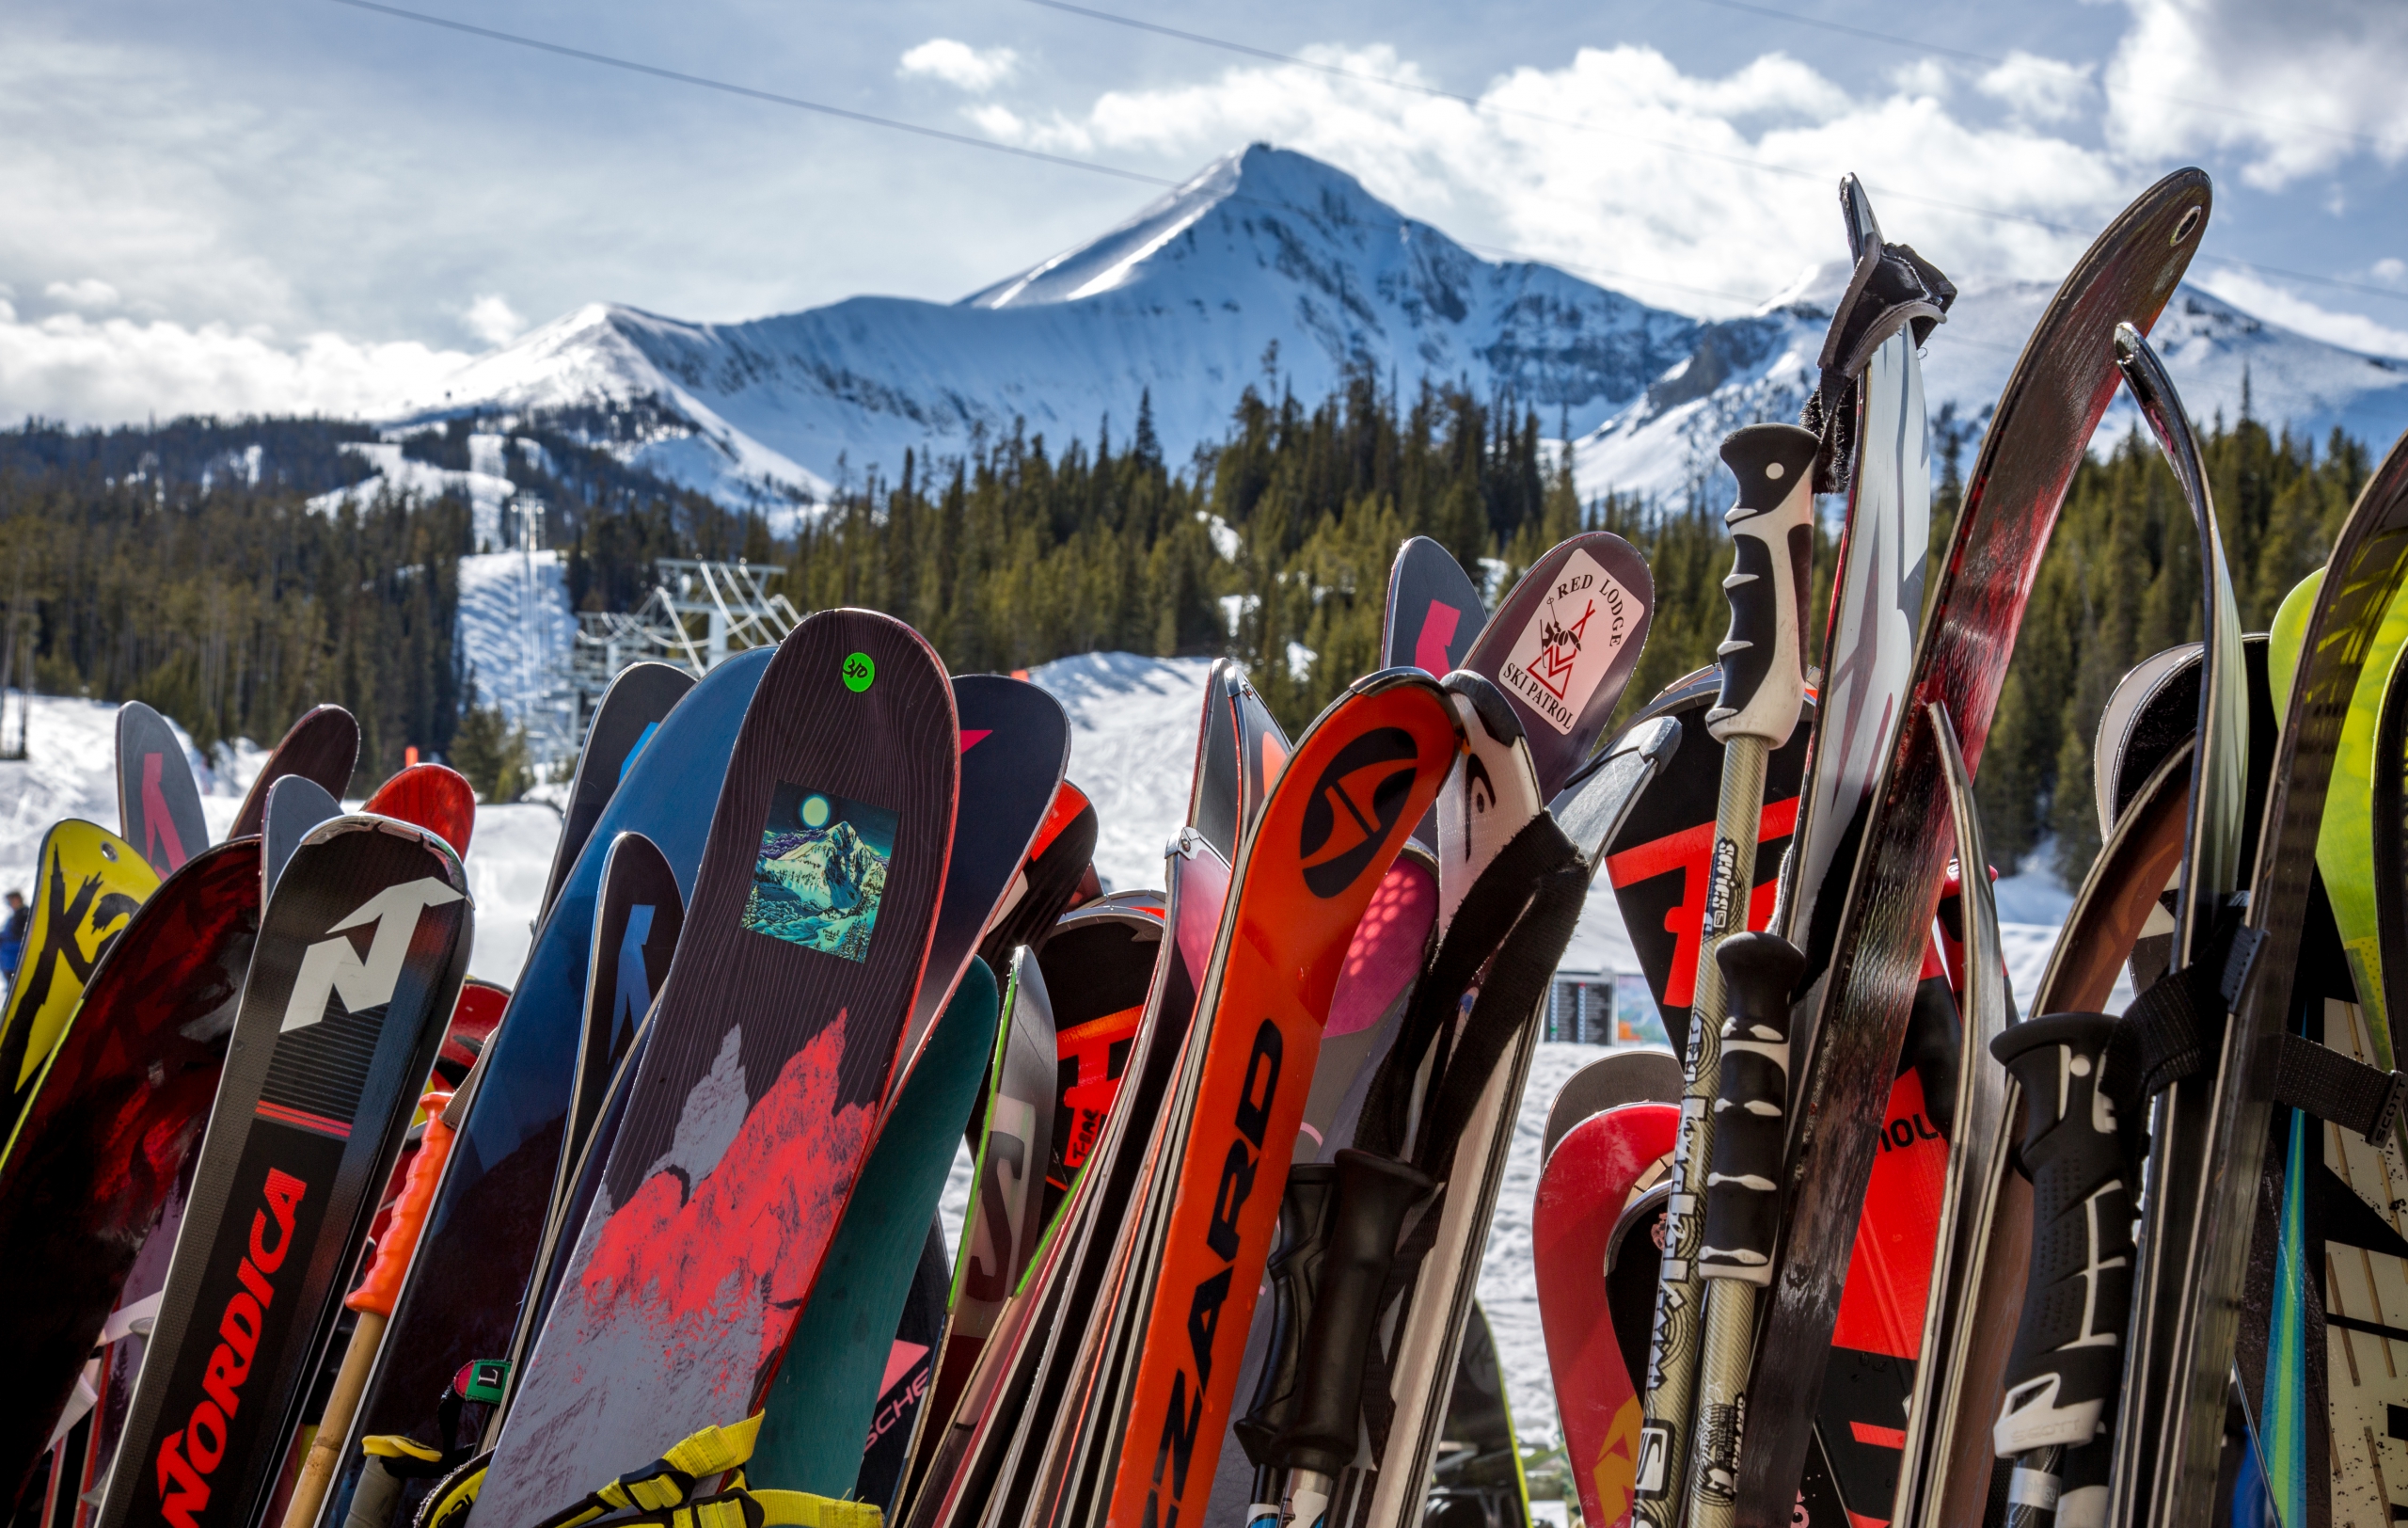 Skis and snowboards rest on a ski rack with Big Sky's Lone Peak in the background